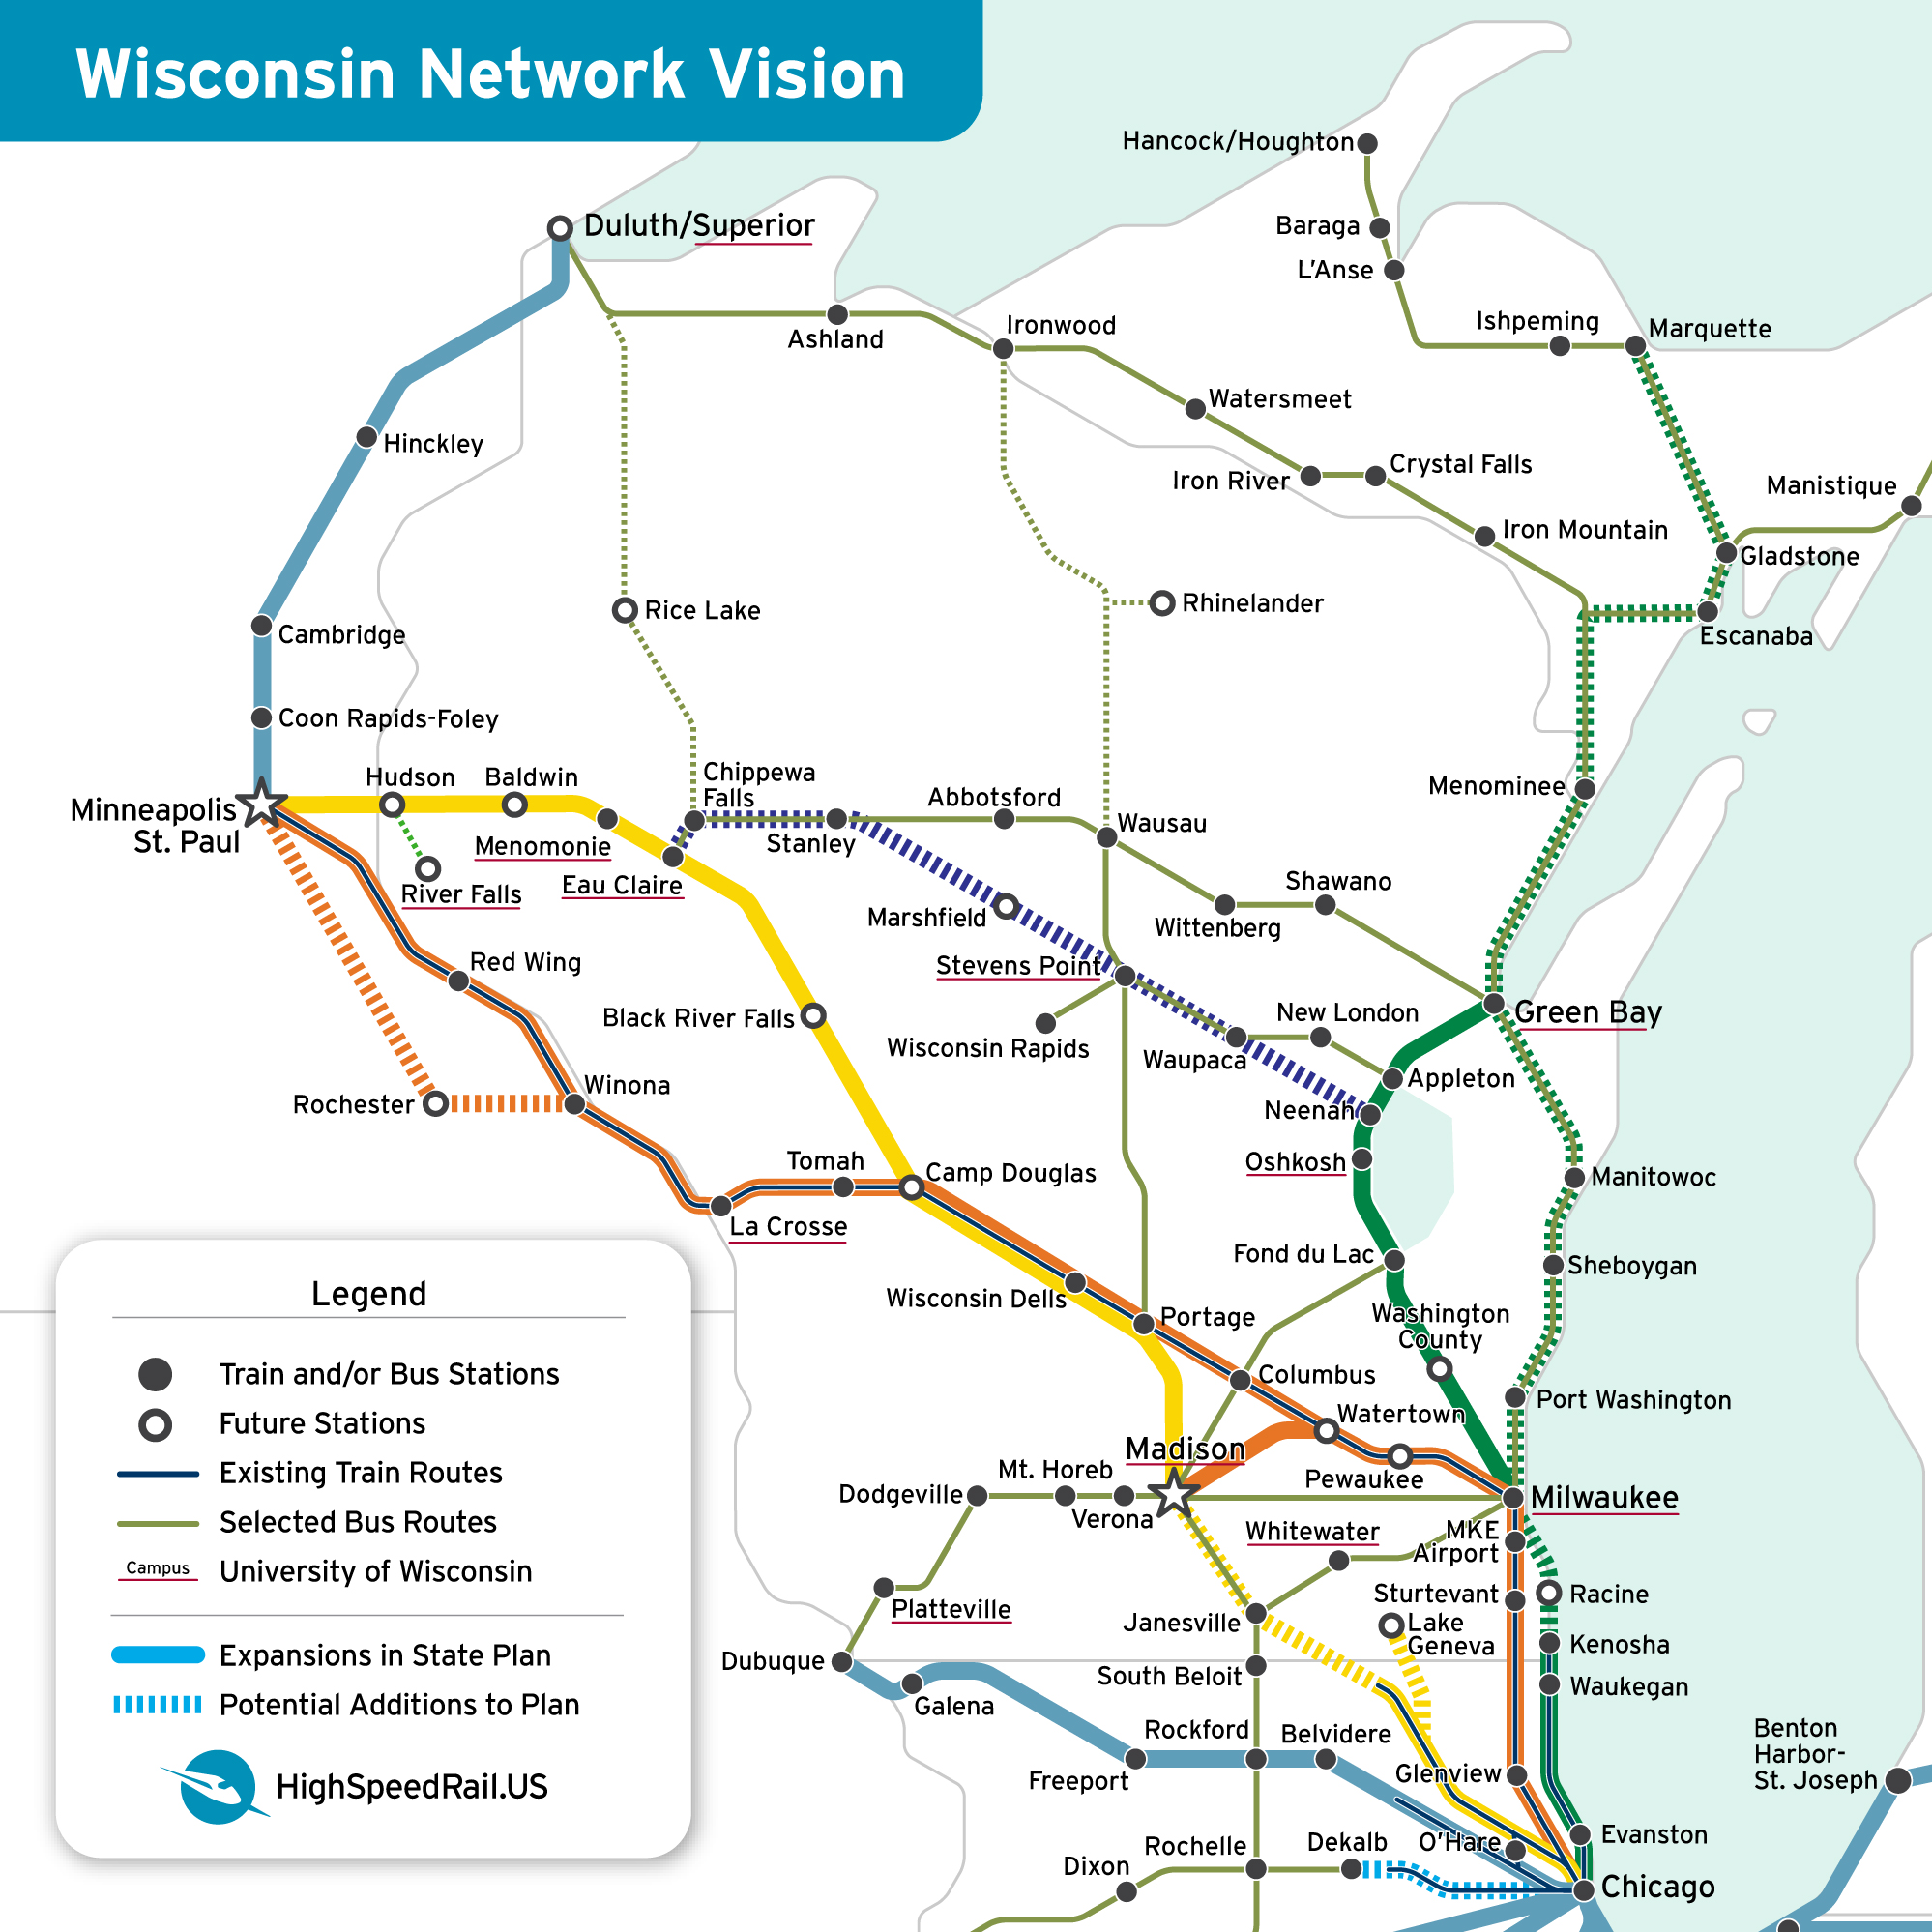 Map of Wisconsin showing proposed new passenger train lines and connecting buses throughout the state.